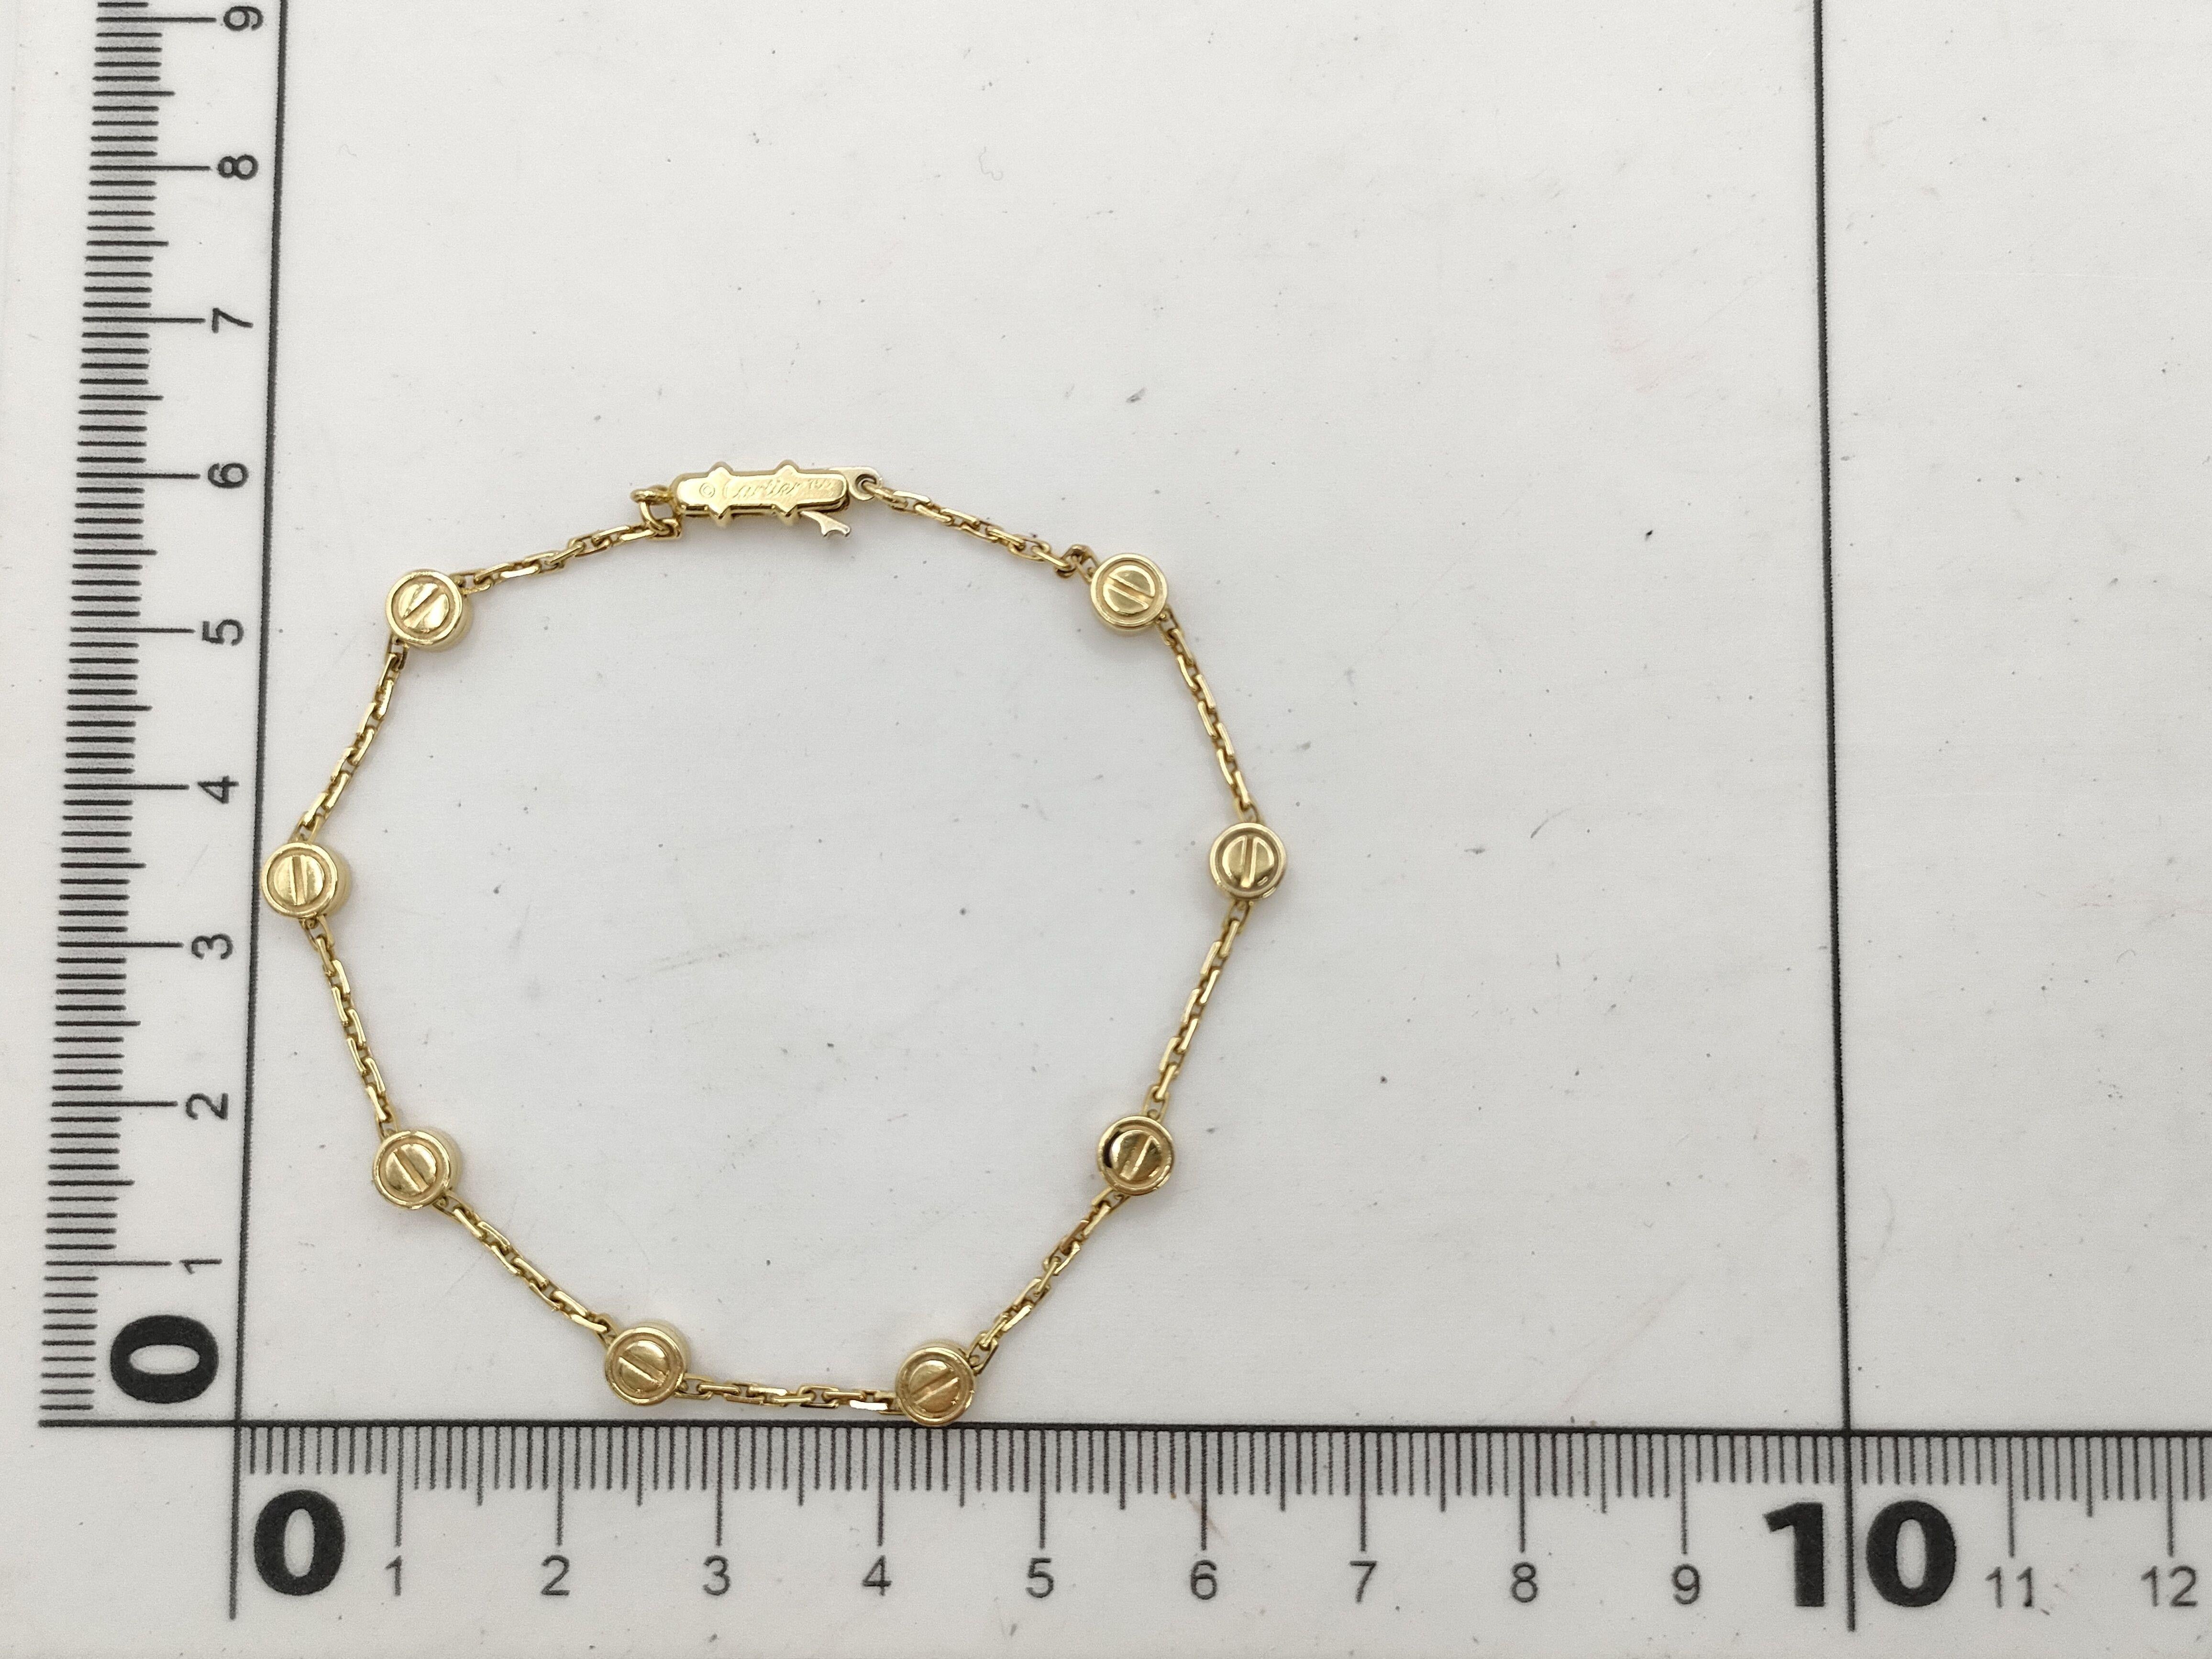 Brand : Cartier
Description: Cartier Love Bracelet 
Metal Type: 750YG/Yellow Gold
Total Weight:  7.2g
Condition: Preowned; small signs of wearing
Box -  Not Included
Papers -  Not Included
